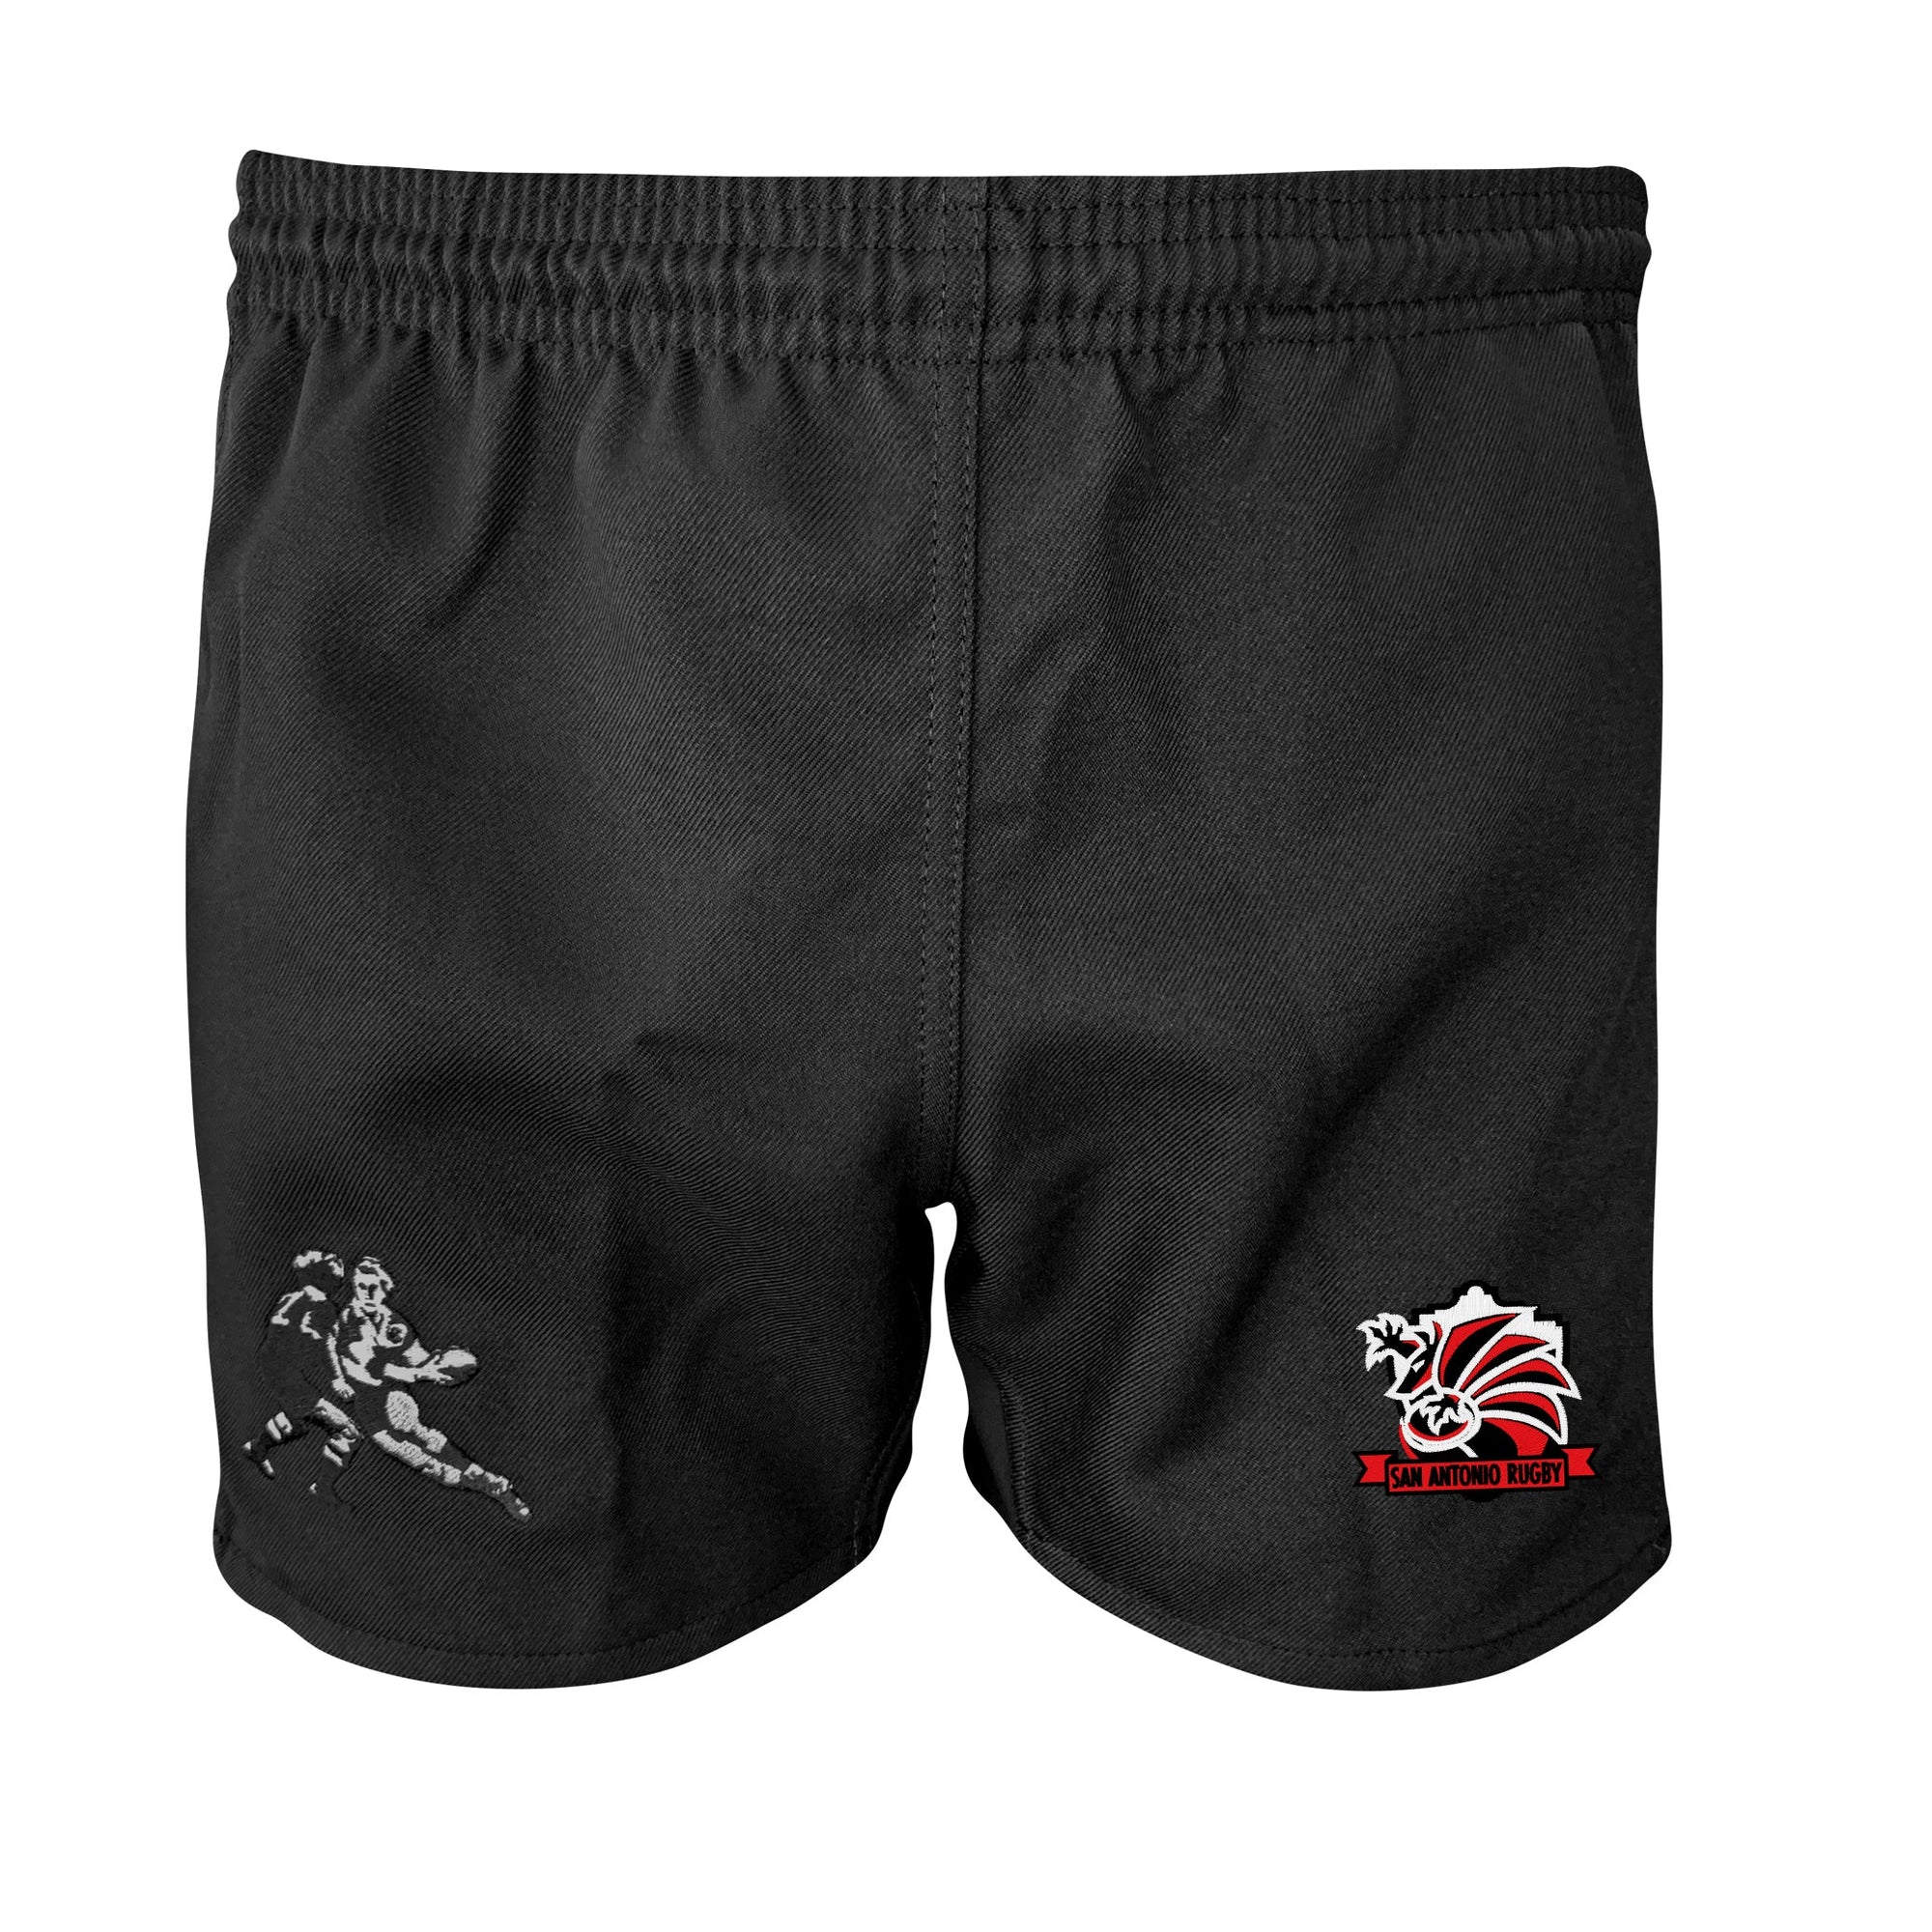 Rugby Imports San Antonio RFC Pro Power Rugby Shorts